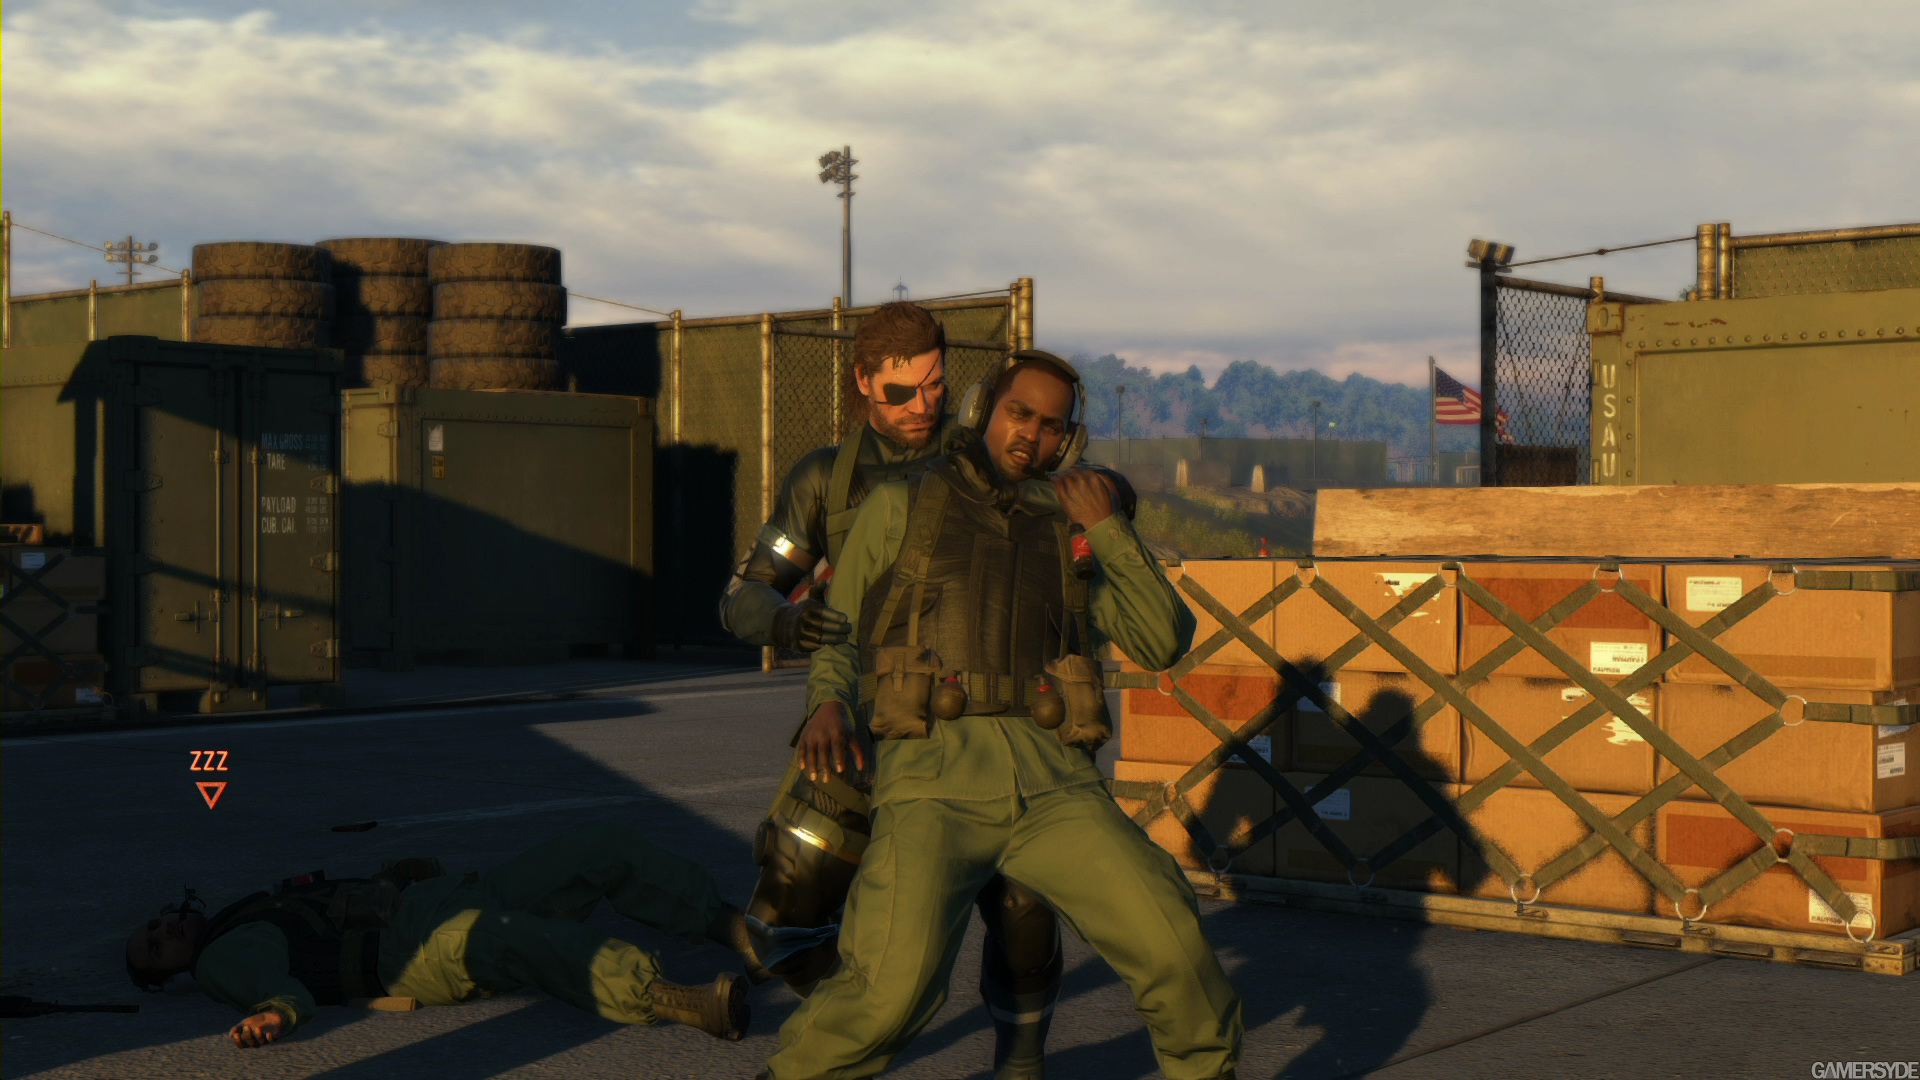 image_metal_gear_solid_v_ground_zeroes-23638-2849_0011.jpg